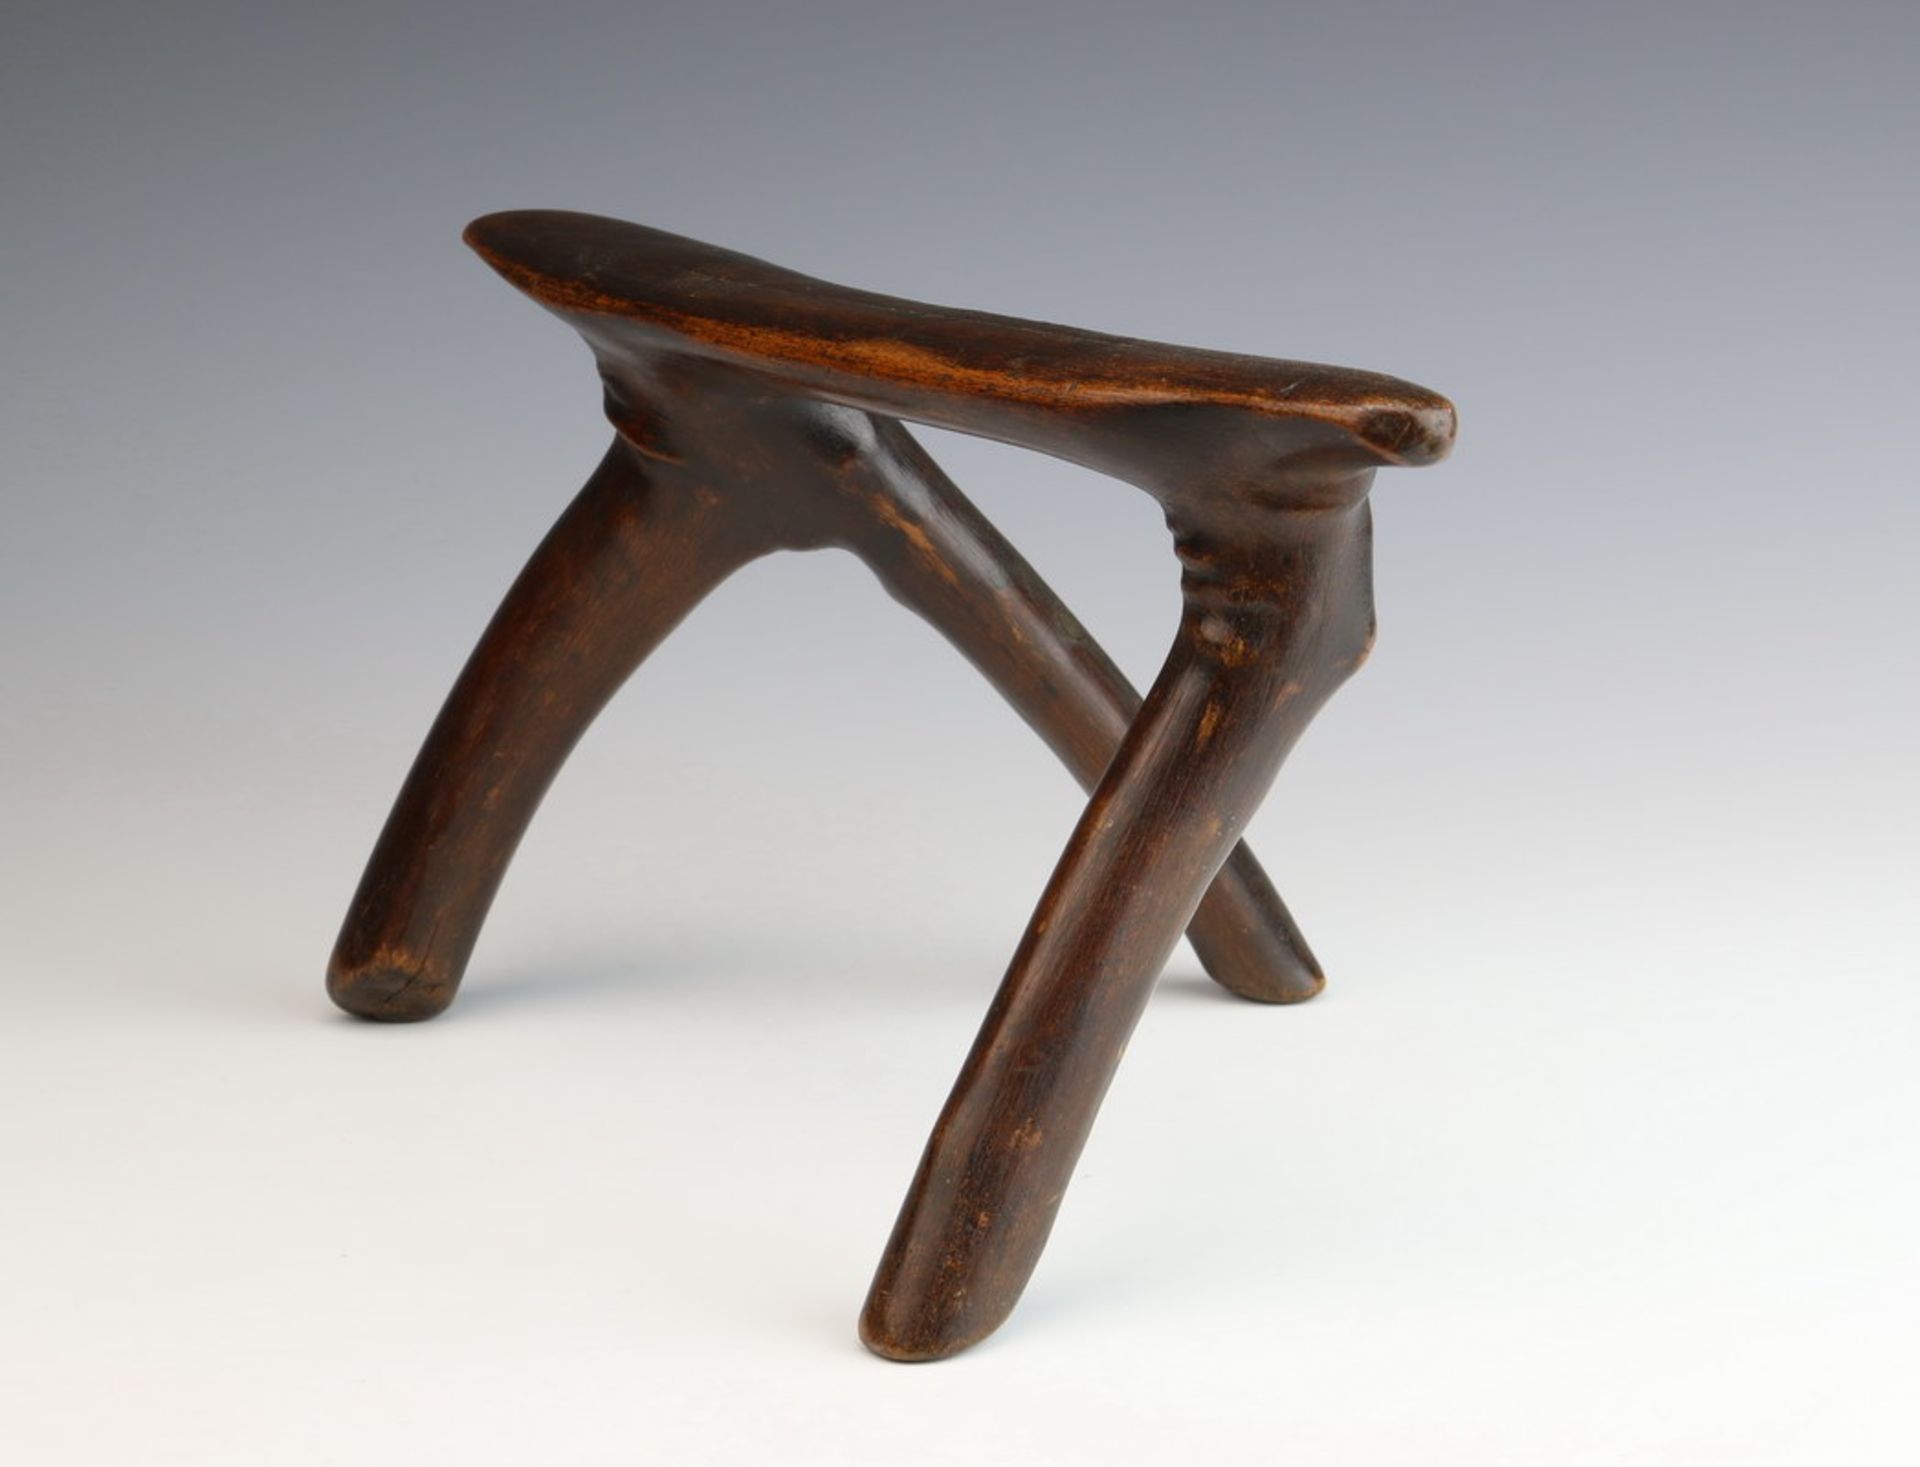 South Sudan, Dinka, wooden neckrest,with three curved legs. With glossy dark brown patina. Private - Bild 4 aus 4